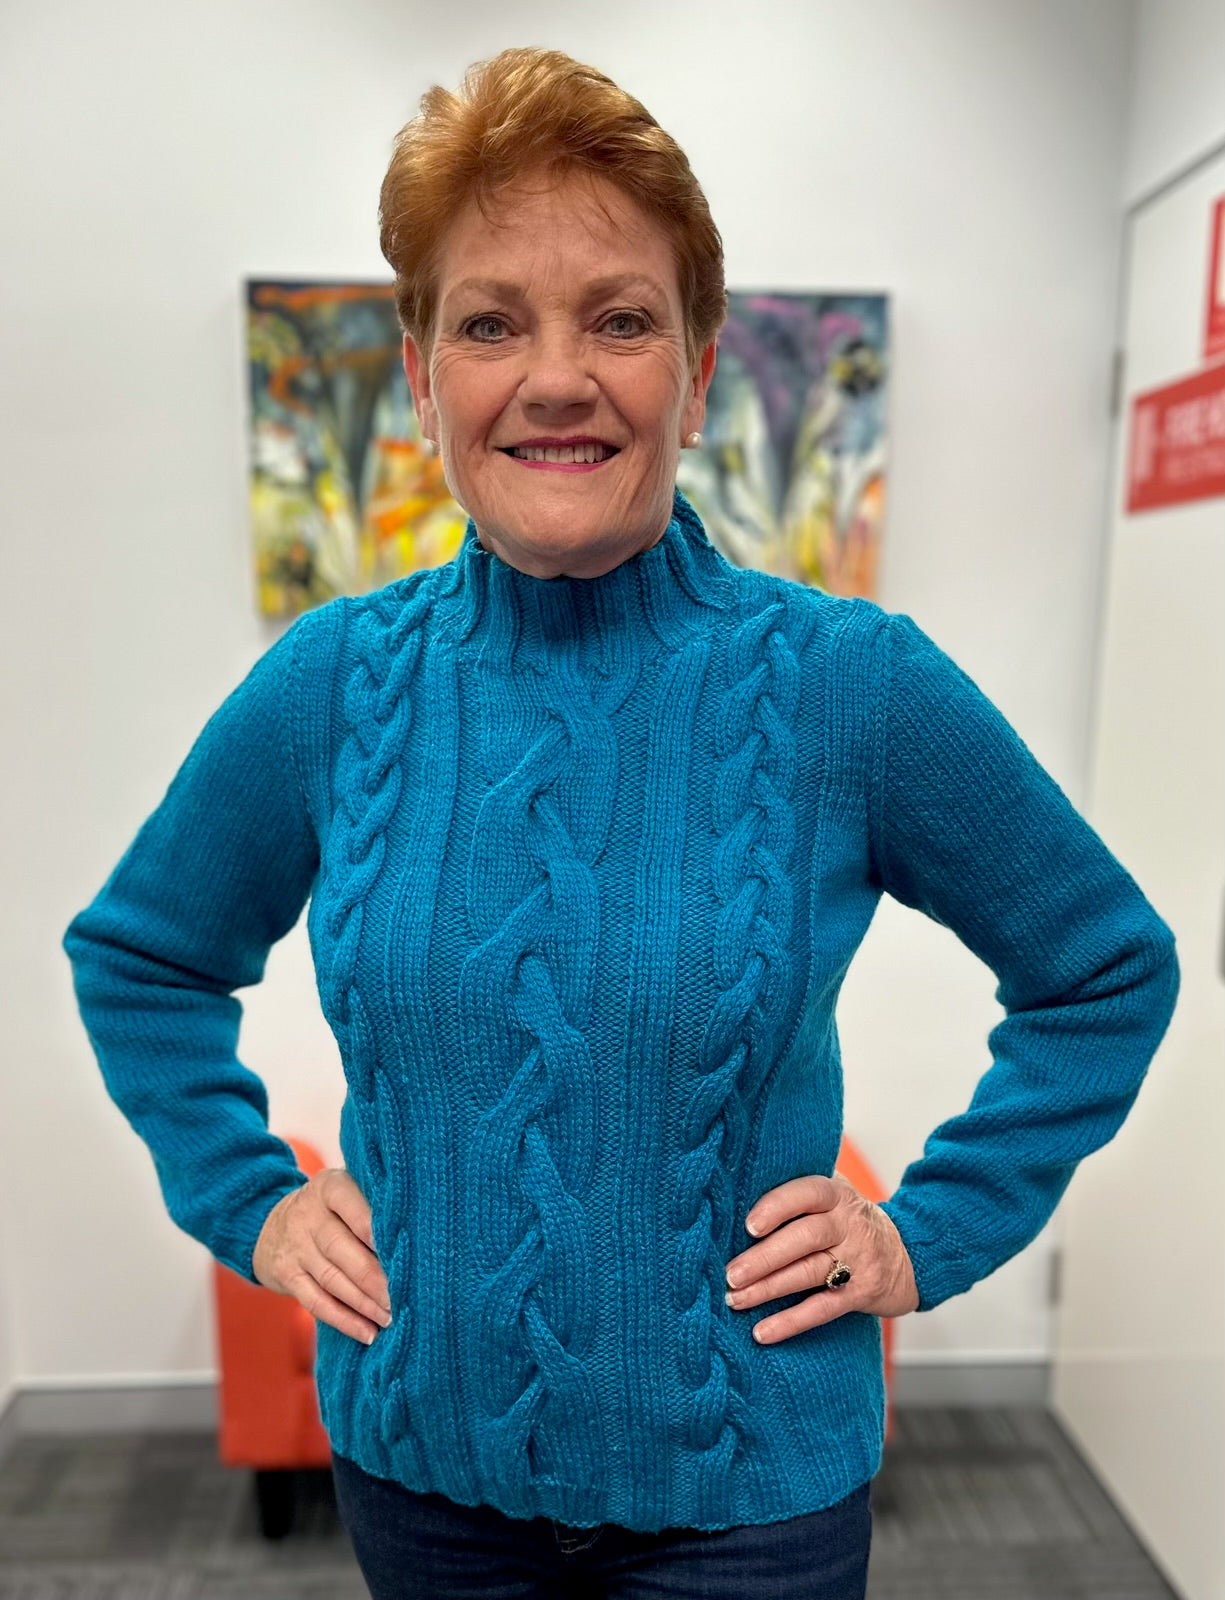 12 Ply Heavy Weight Turquoise - Pauline Hanson's Winter Hand Knit